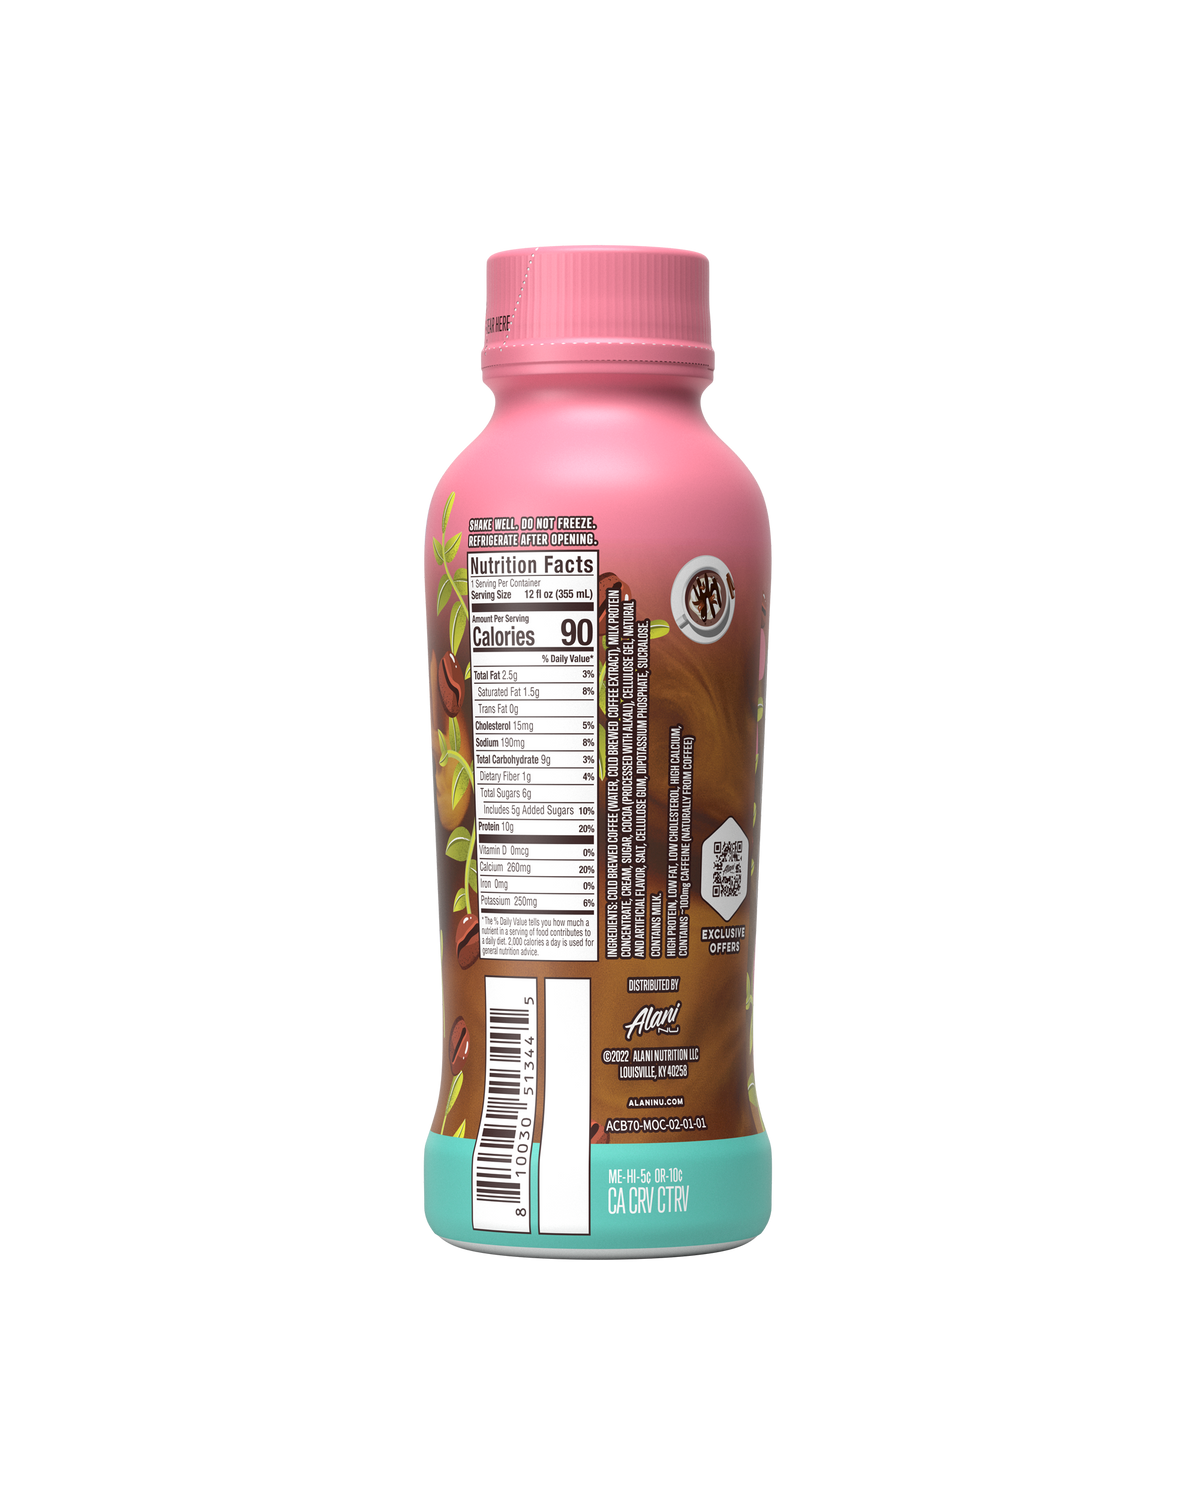 A back view of Coffee in Mocha flavor coffee highlighting nutrition facts.